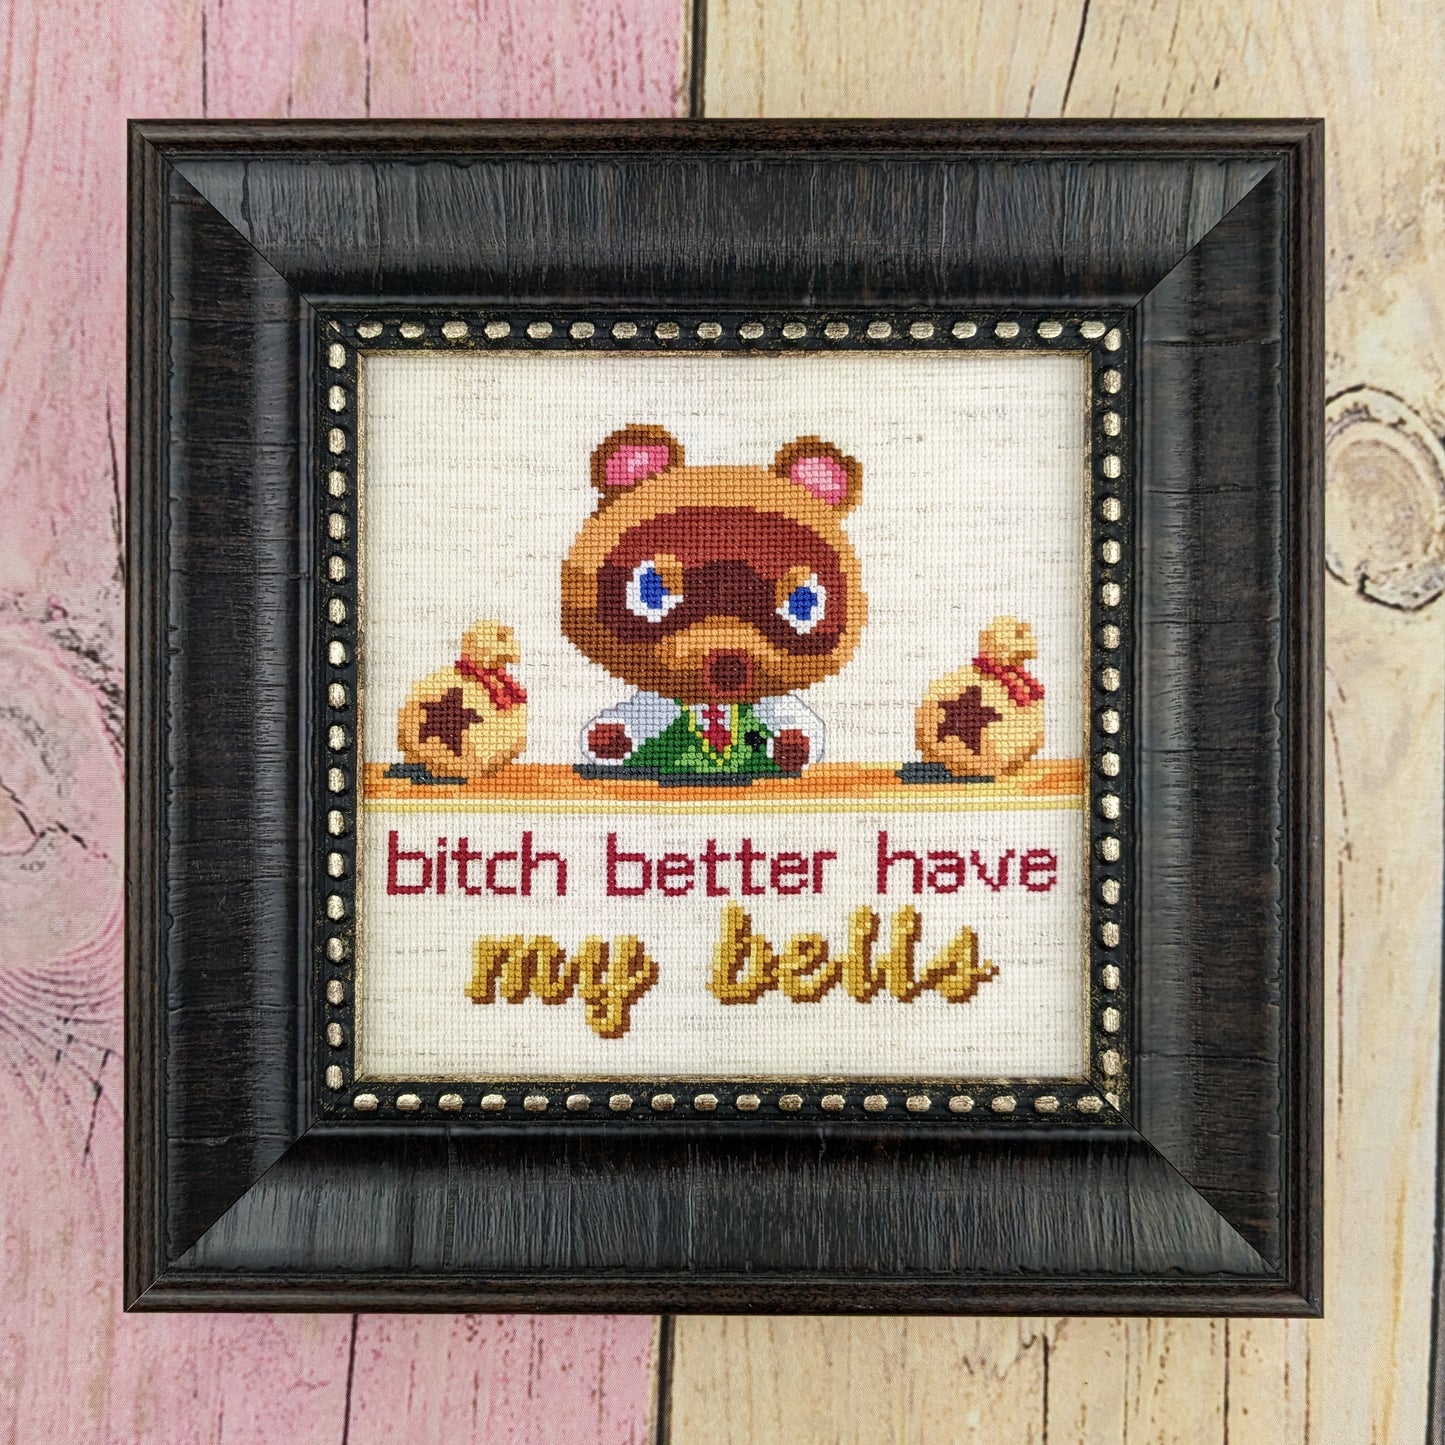 A cross stitch depicting Tom Nook from Animal Crossing New Horizons sitting at his desk with an angry look on his face. He is flanked by two bags of bells laying on his desk. Text under the desk reads "bitch better have my bells", with the words "my bells" being cursive and golden. The stitch is done on oatmeal aida and displayed in a black square frame on pastel stained fenced wood. 